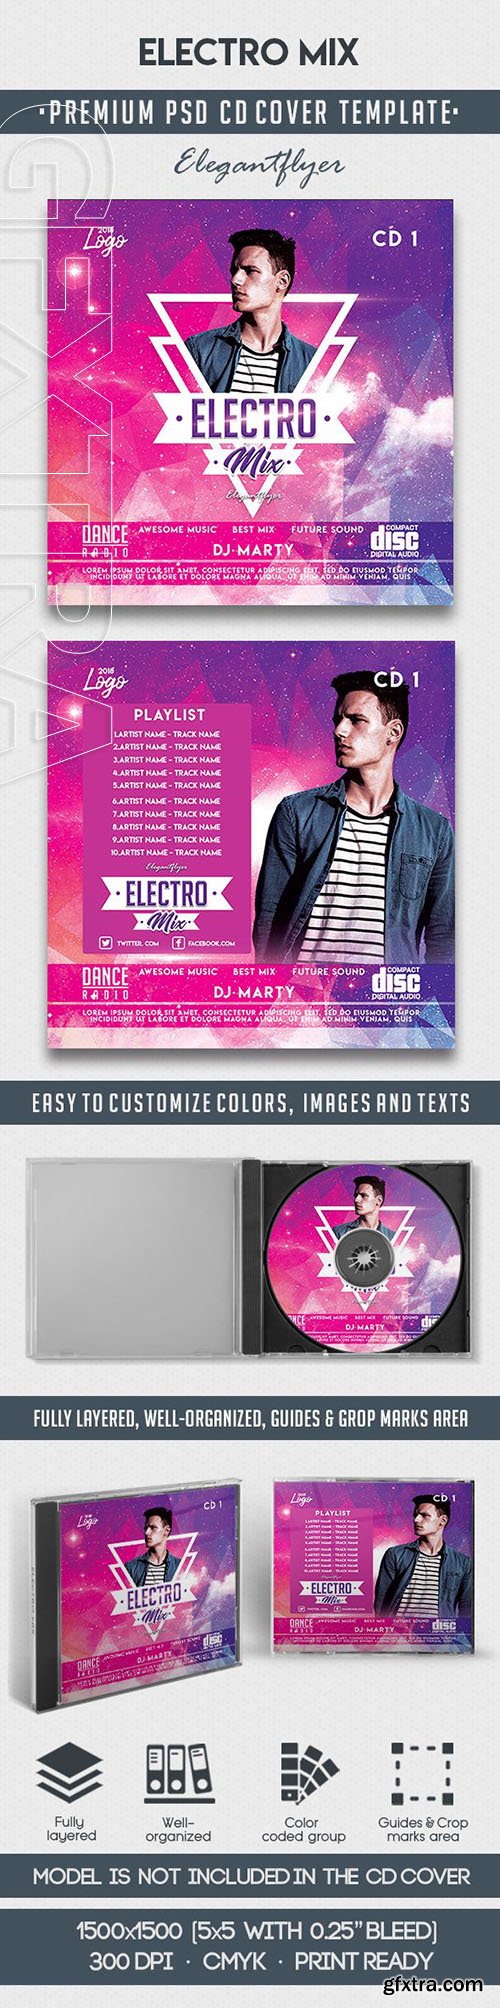 Electro Mix – Premium CD Cover PSD Template